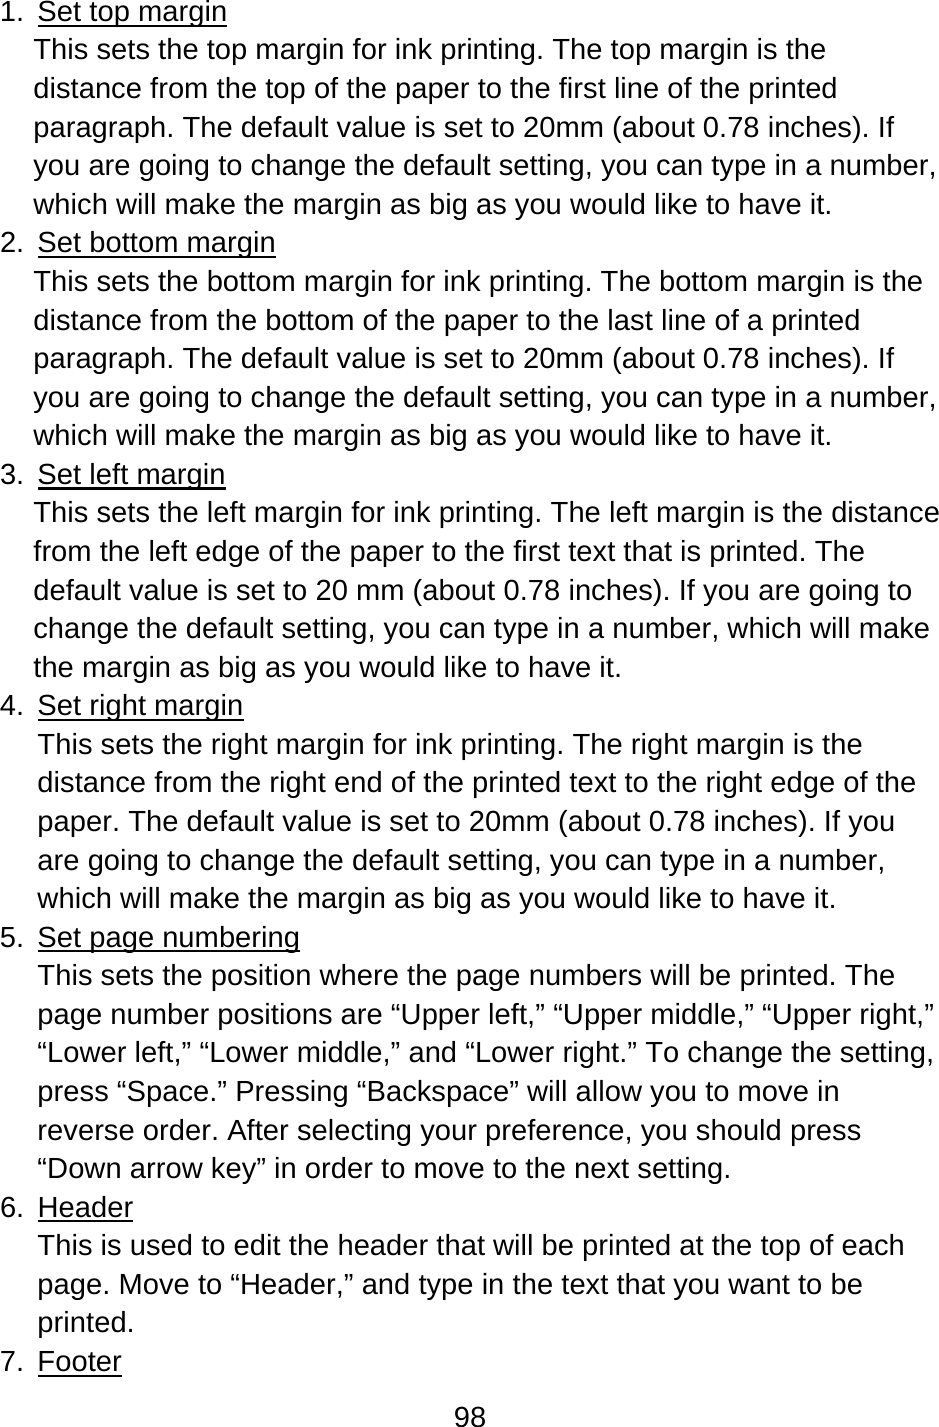 98  1.  Set top margin This sets the top margin for ink printing. The top margin is the distance from the top of the paper to the first line of the printed paragraph. The default value is set to 20mm (about 0.78 inches). If you are going to change the default setting, you can type in a number, which will make the margin as big as you would like to have it. 2.  Set bottom margin This sets the bottom margin for ink printing. The bottom margin is the distance from the bottom of the paper to the last line of a printed paragraph. The default value is set to 20mm (about 0.78 inches). If you are going to change the default setting, you can type in a number, which will make the margin as big as you would like to have it. 3.  Set left margin This sets the left margin for ink printing. The left margin is the distance from the left edge of the paper to the first text that is printed. The default value is set to 20 mm (about 0.78 inches). If you are going to change the default setting, you can type in a number, which will make the margin as big as you would like to have it. 4. Set right margin This sets the right margin for ink printing. The right margin is the distance from the right end of the printed text to the right edge of the paper. The default value is set to 20mm (about 0.78 inches). If you are going to change the default setting, you can type in a number, which will make the margin as big as you would like to have it. 5. Set page numbering This sets the position where the page numbers will be printed. The page number positions are “Upper left,” “Upper middle,” “Upper right,” “Lower left,” “Lower middle,” and “Lower right.” To change the setting, press “Space.” Pressing “Backspace” will allow you to move in reverse order. After selecting your preference, you should press “Down arrow key” in order to move to the next setting. 6. Header This is used to edit the header that will be printed at the top of each page. Move to “Header,” and type in the text that you want to be printed. 7. Footer 